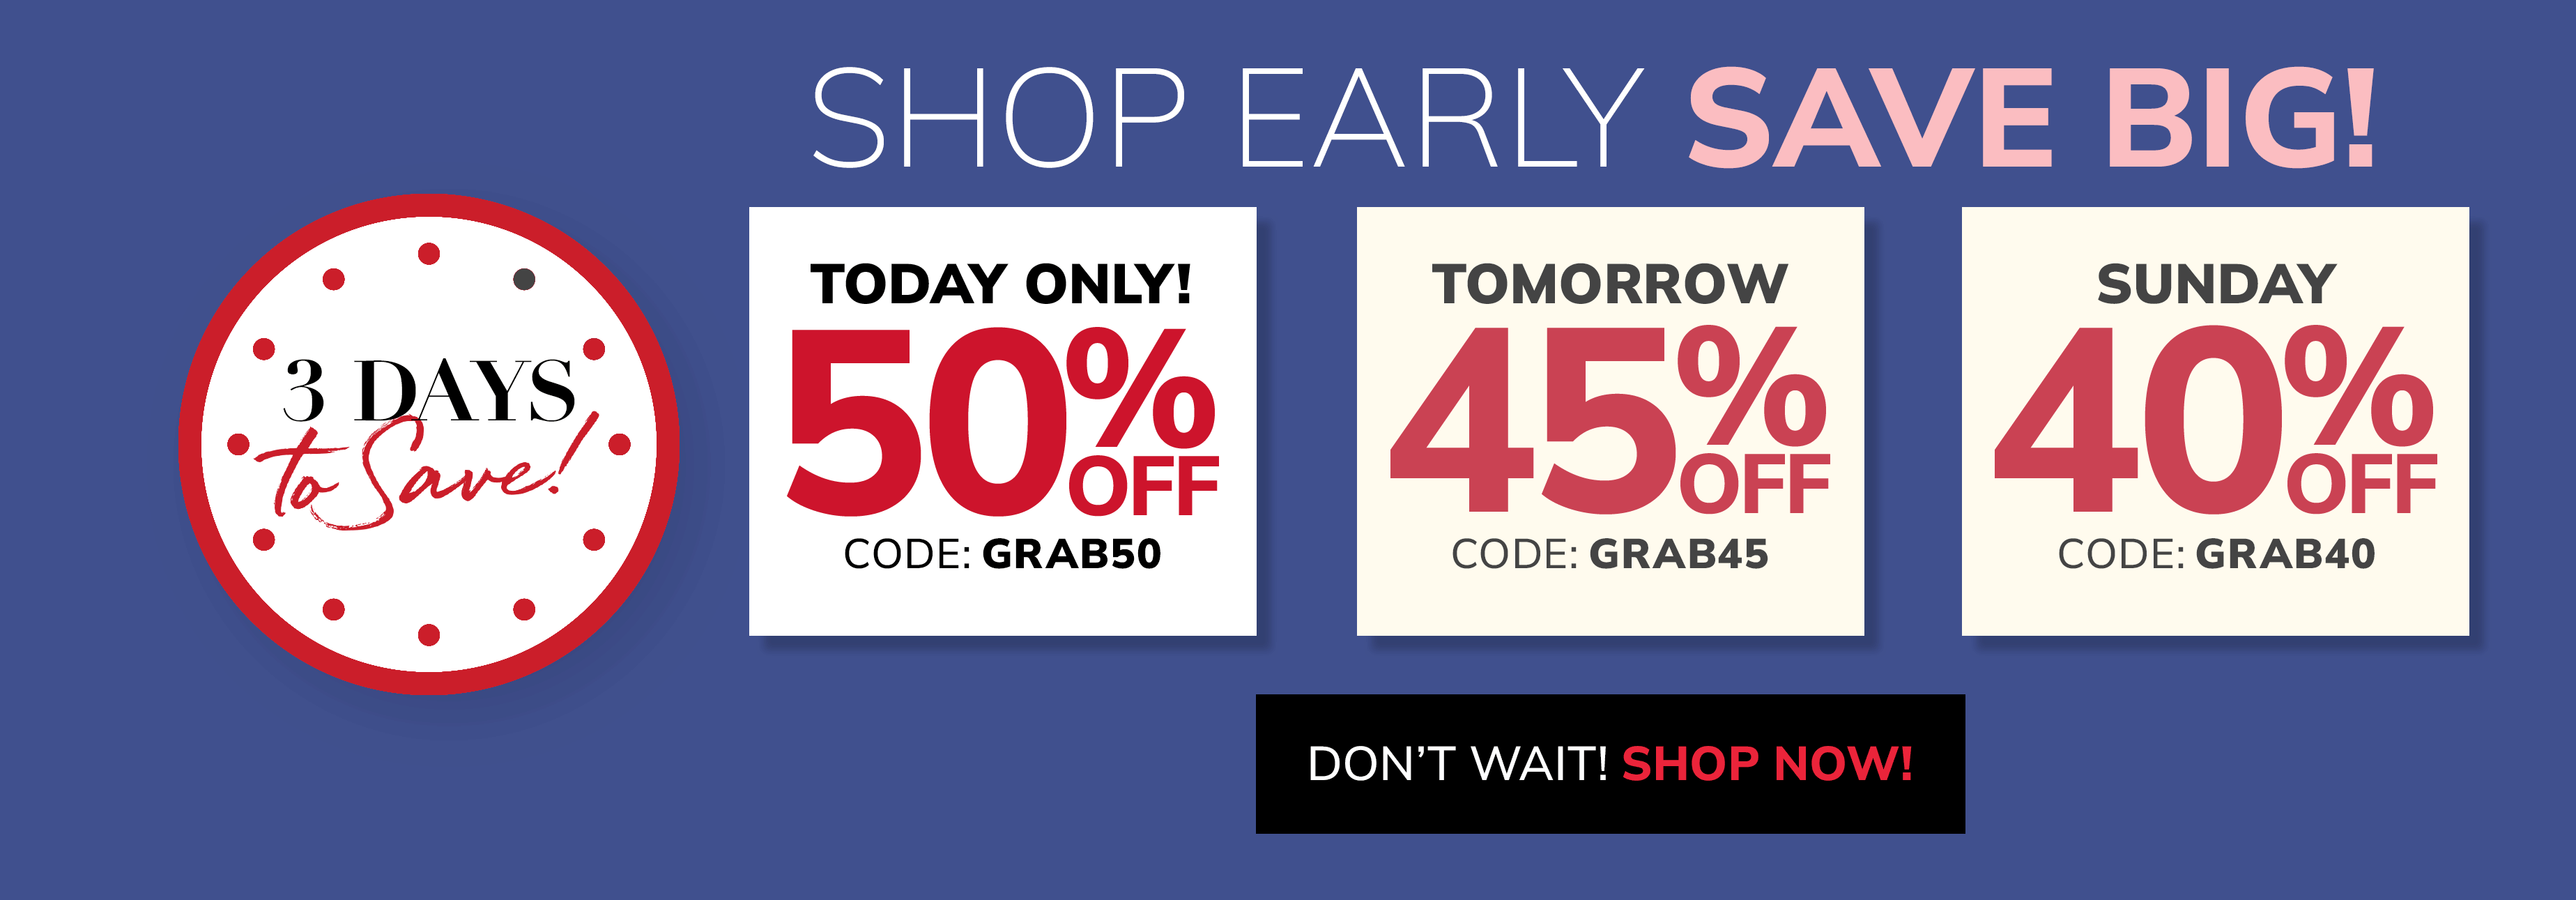 Shop early save big! Today only! 50% off. Code: GRAB50  - shop now